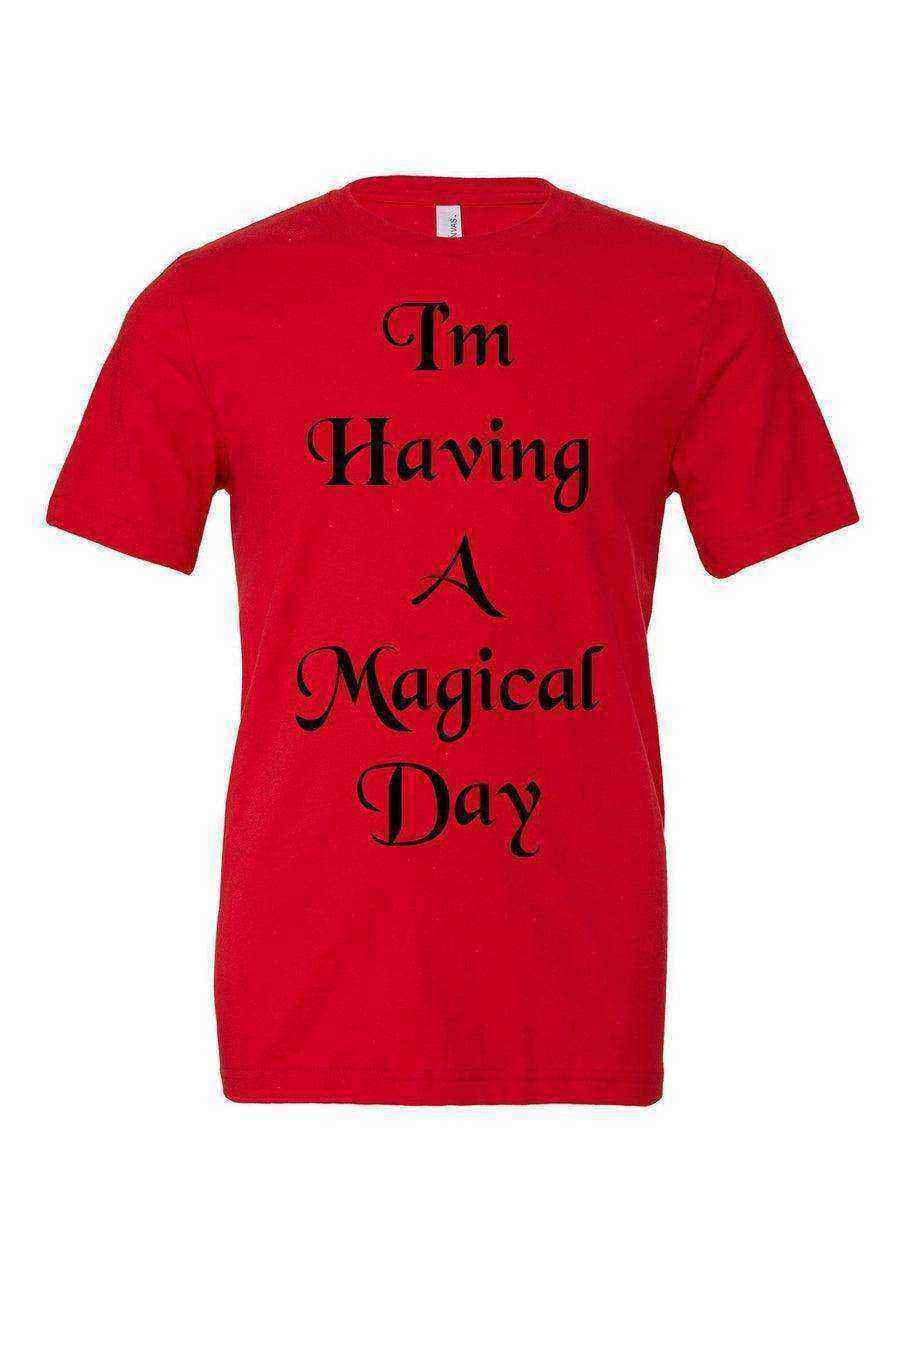 Im Having A Magical Day - Dylan's Tees